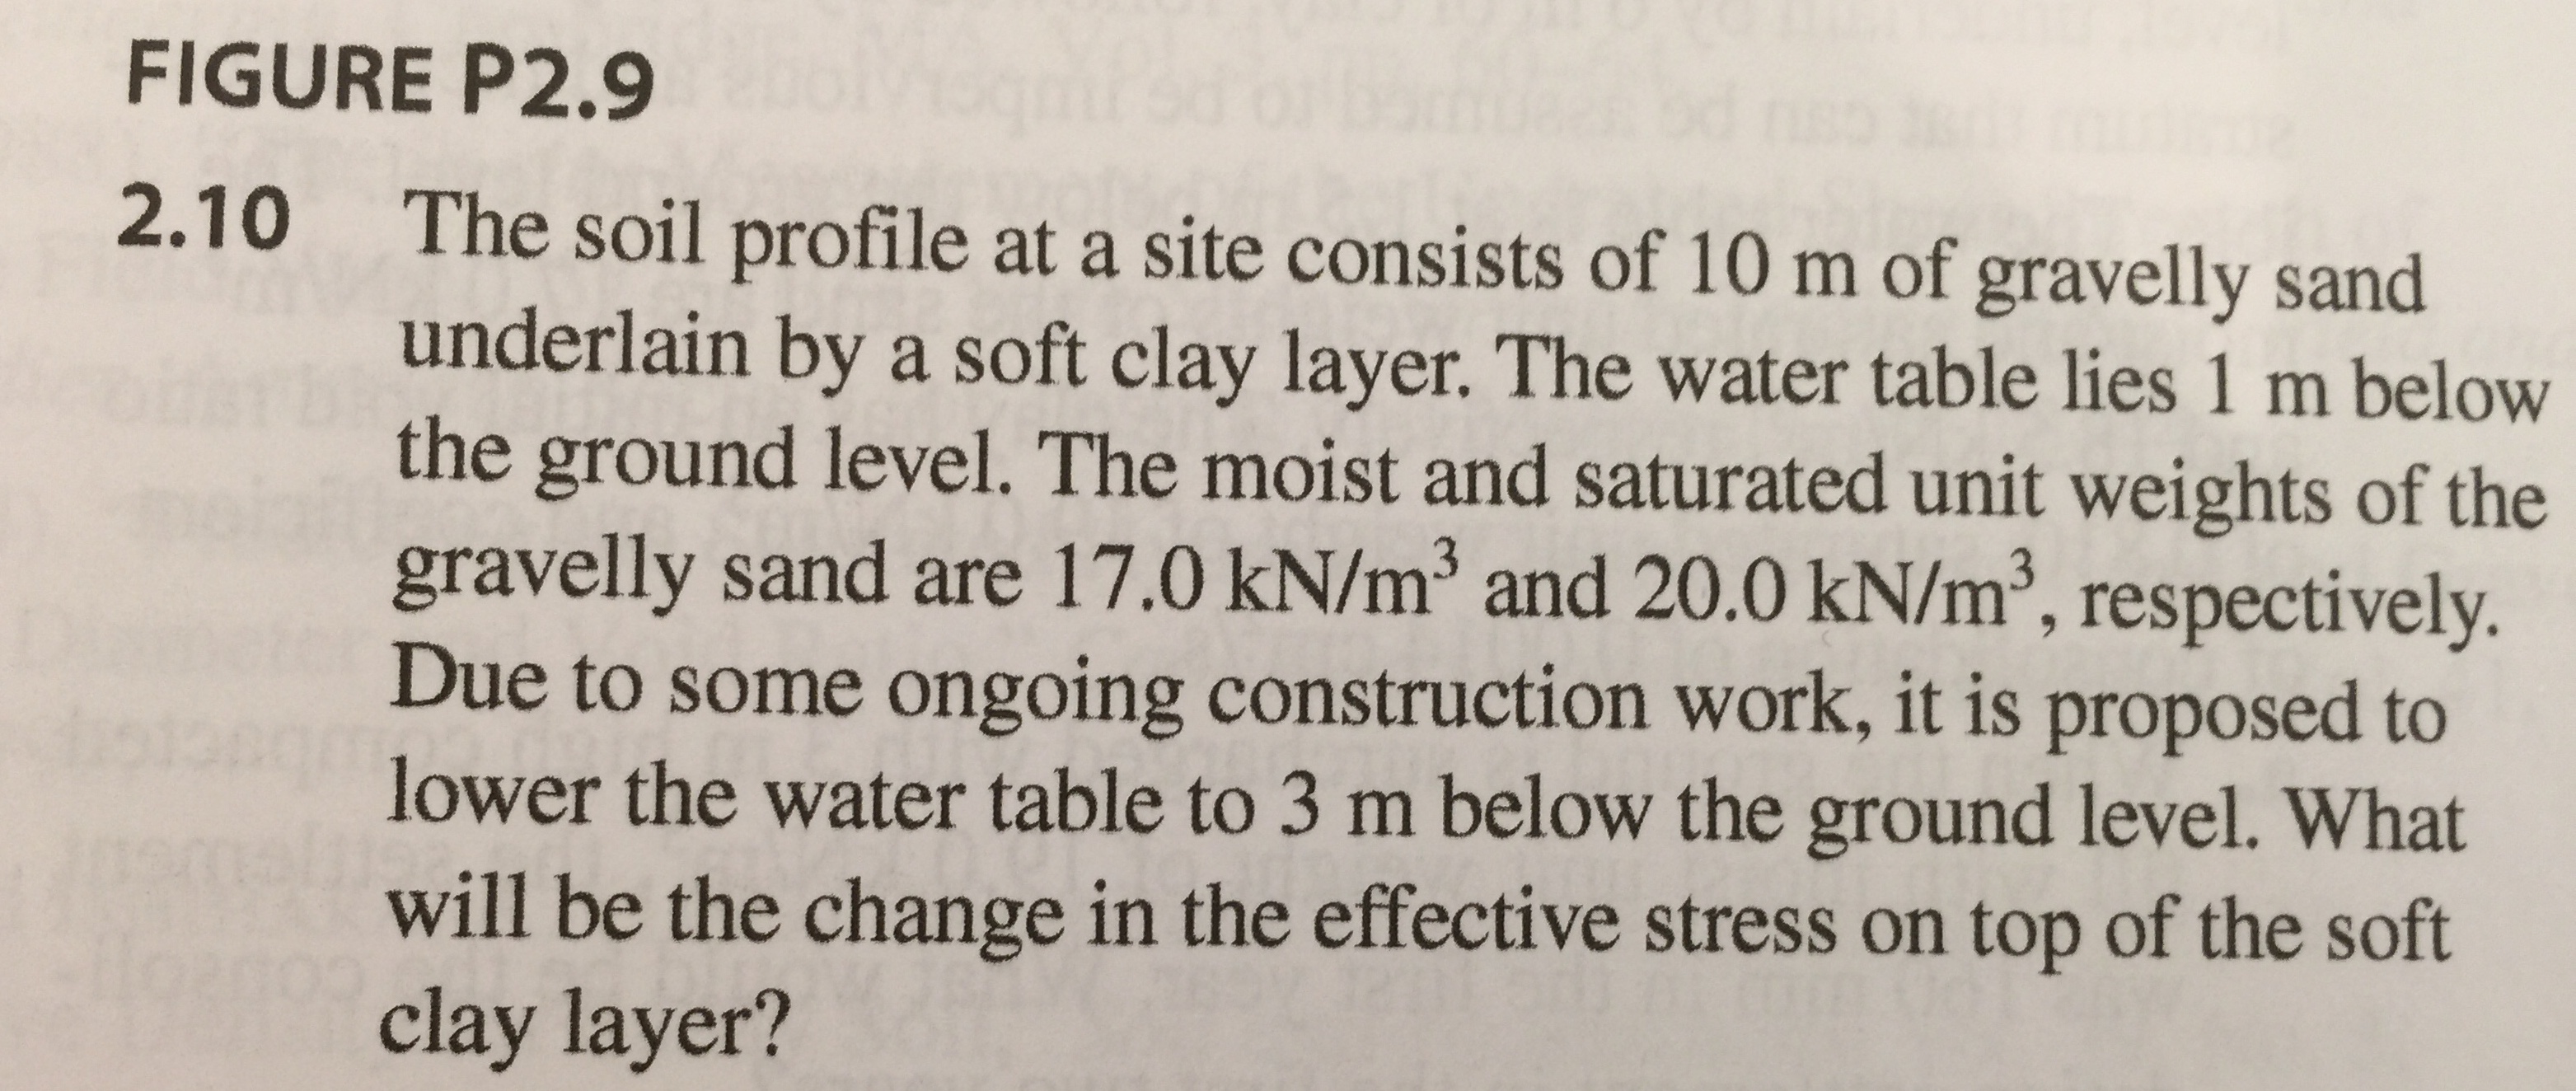 FIGURE P2.9
The soil profile at a site consists of 10 m of gravelly sand
underlain by a soft clay layer. The water table lies 1 m below
the ground level. The moist and saturated unit weights of the
gravelly sand are 17.0 kN/m3 and 20.0 kN/m3, respectively.
Due to some ongoing construction work, it is proposed to
lower the water table to 3 m below the ground level. What
will be the change in the effective stress on top of the soft
clay layer?
2.10
